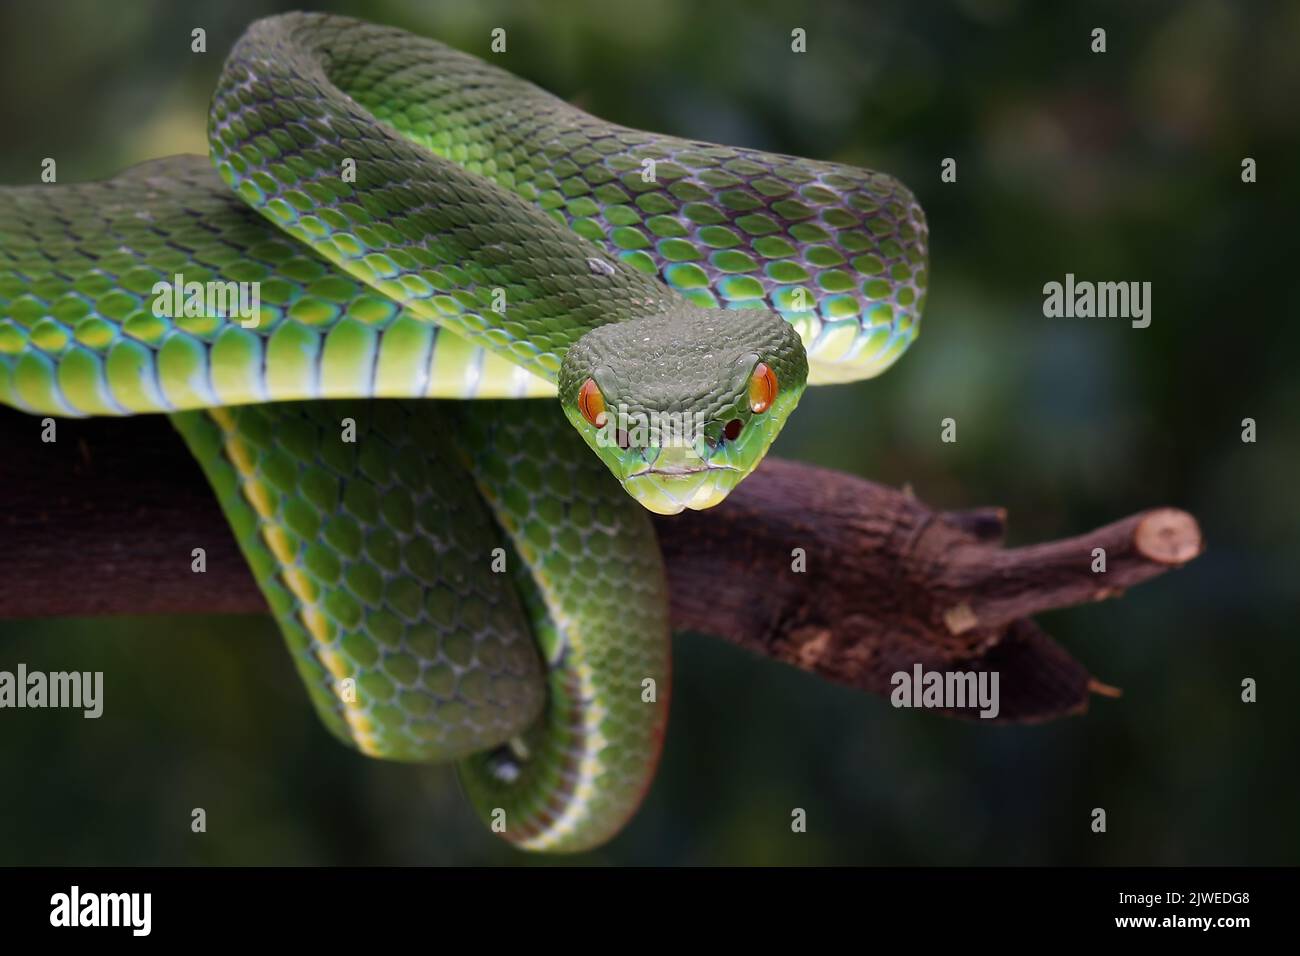 Close-Up of a white-lipped pit viper on a branch, Indonesia Stock Photo